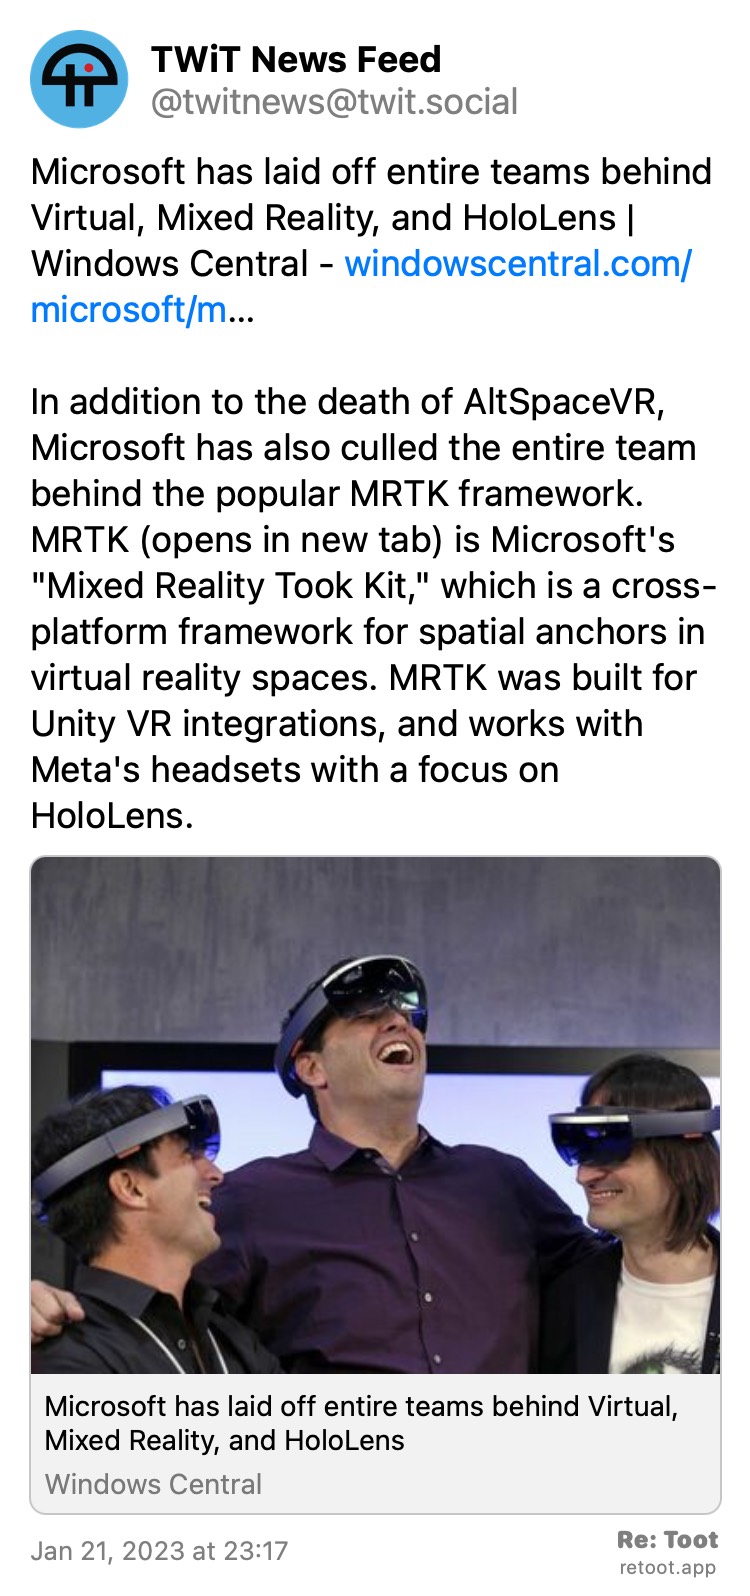 Post by TWiT News Feed. "Microsoft has laid off entire teams behind Virtual, Mixed Reality, and HoloLens Windows Central - windowscentral.com/microsoft/m… In addition to the death of AltSpaceVR, Microsoft has also culled the entire team behind the popular MRTK framework. MRTK is Microsoft's "Mixed Reality Took Kit," which is a cross-platform framework for spatial anchors in virtual reality spaces. MRTK was built for Unity VR integrations, and works with Meta's headsets with a focus on HoloLens." Posted on Jan 21, 2023 at 23:17 at https://twit.social/@twitnews/109730924729178428